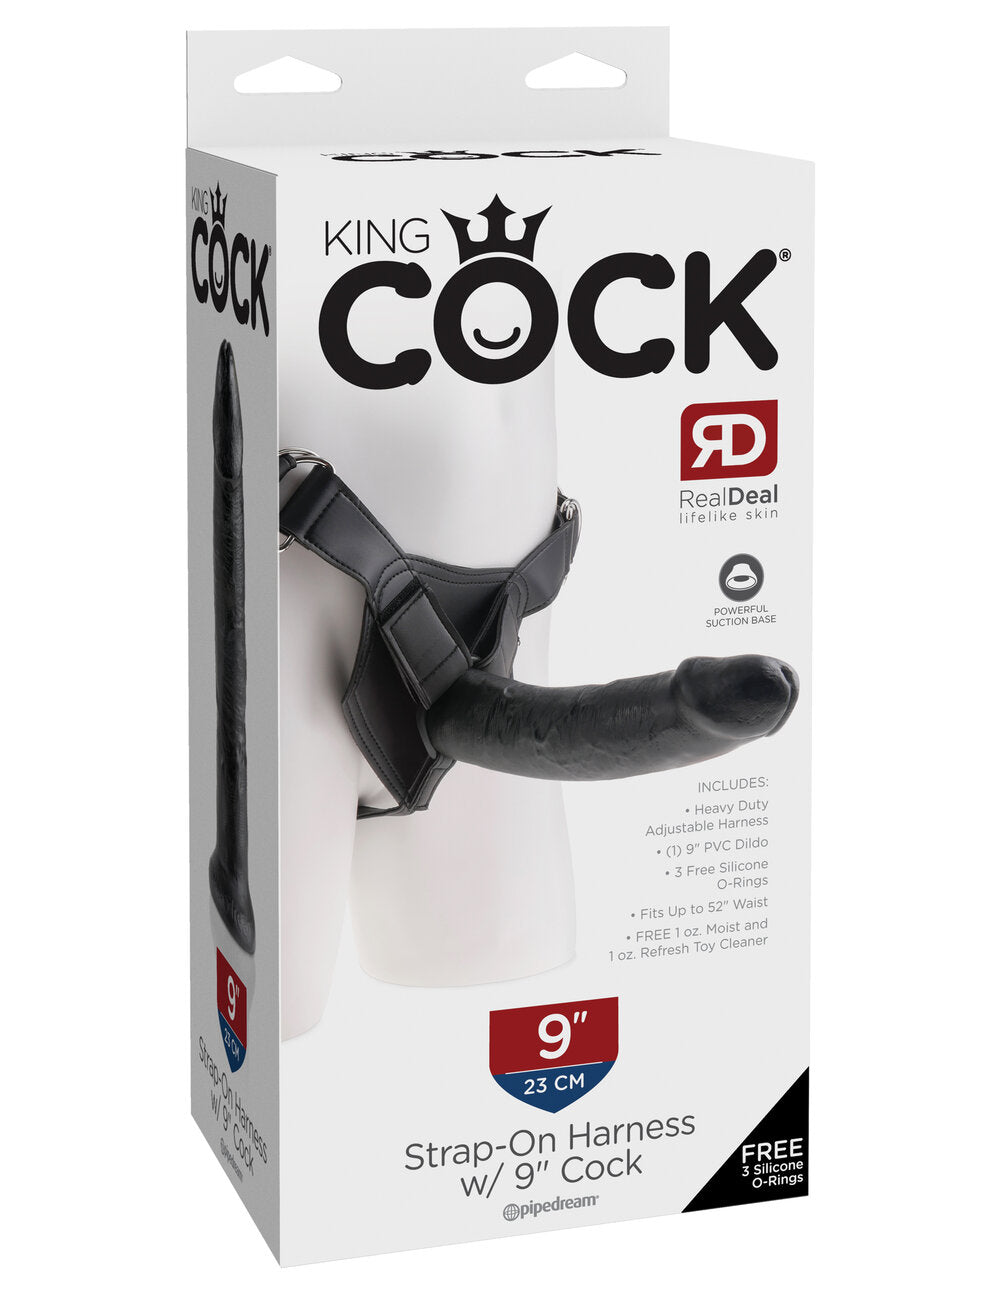 King Cock Strap On Harness w/9in Cock